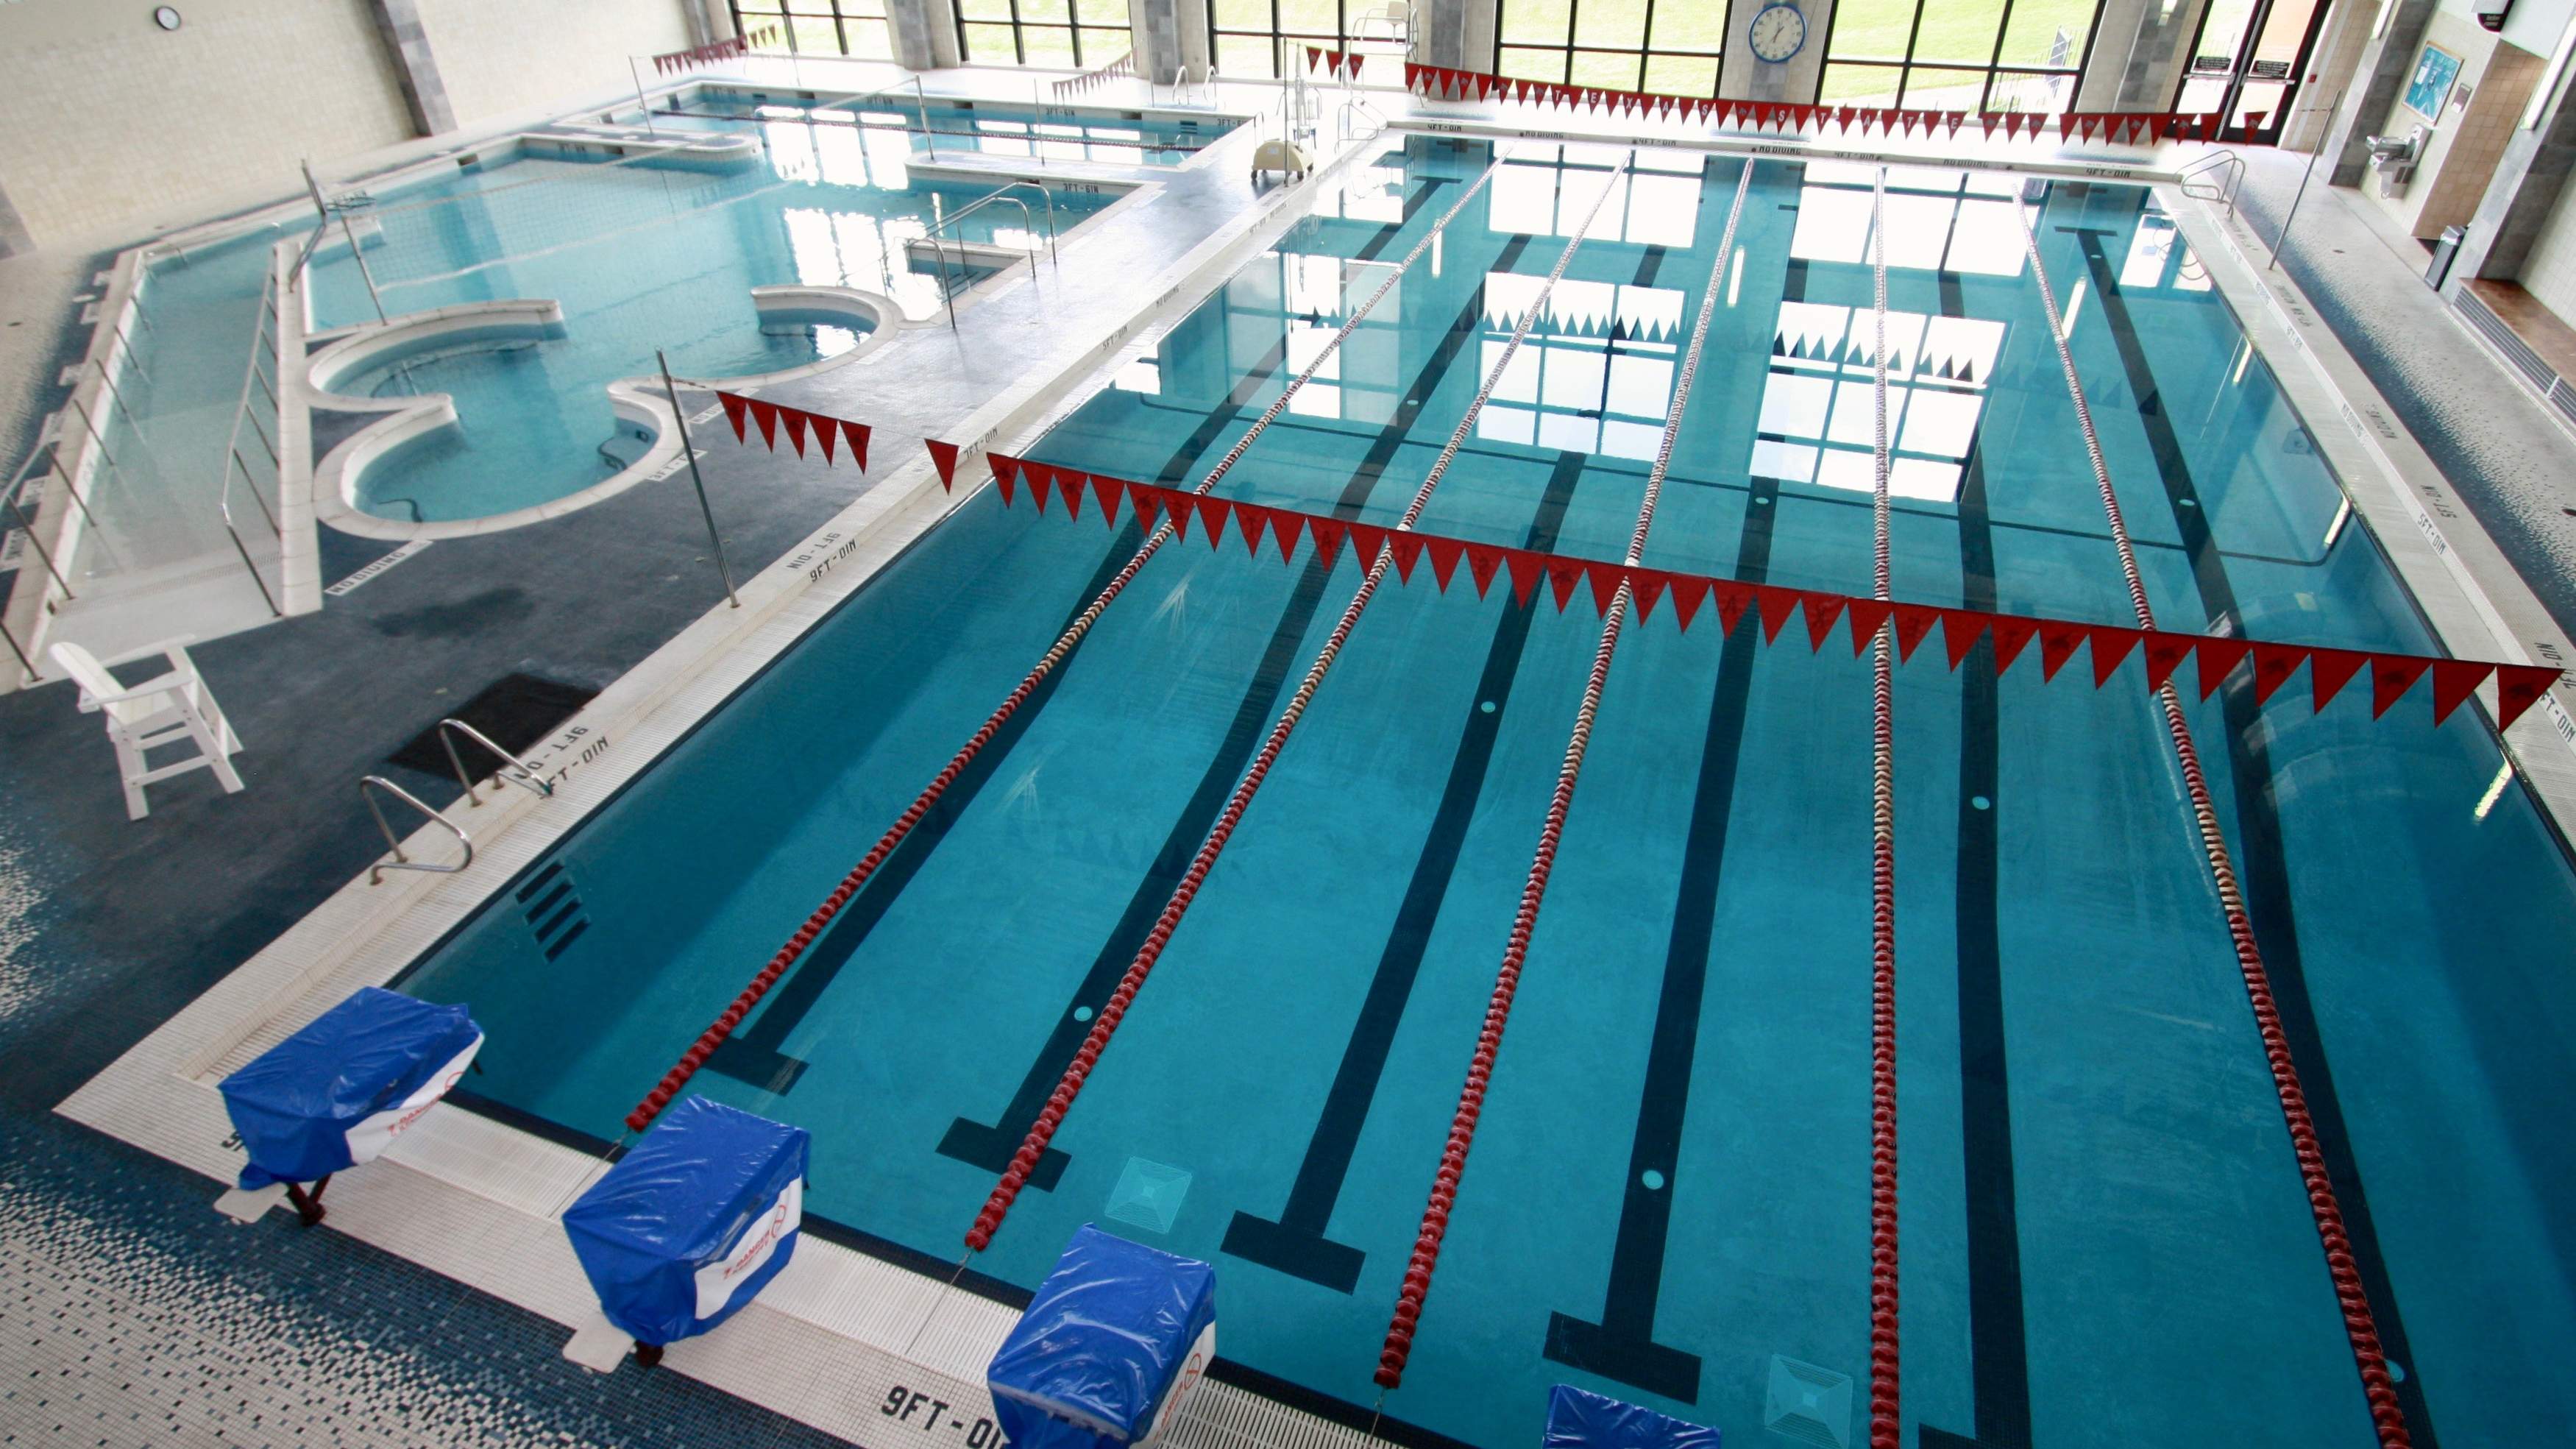 Photo of lap pool with six lanes that are 25 yards in length. Lane lines are marron and white and backstroke flags have TXST logos